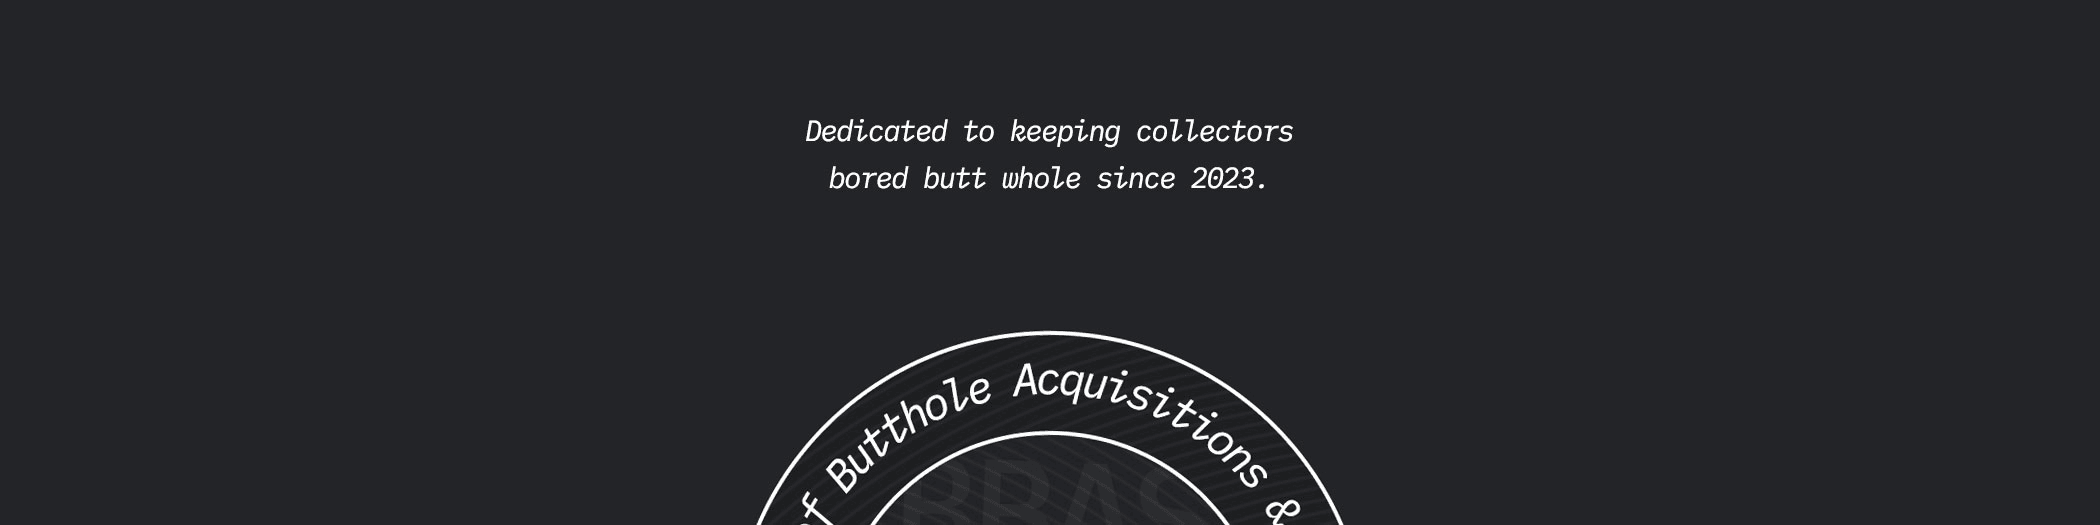 ButtholeAcquisitions banner